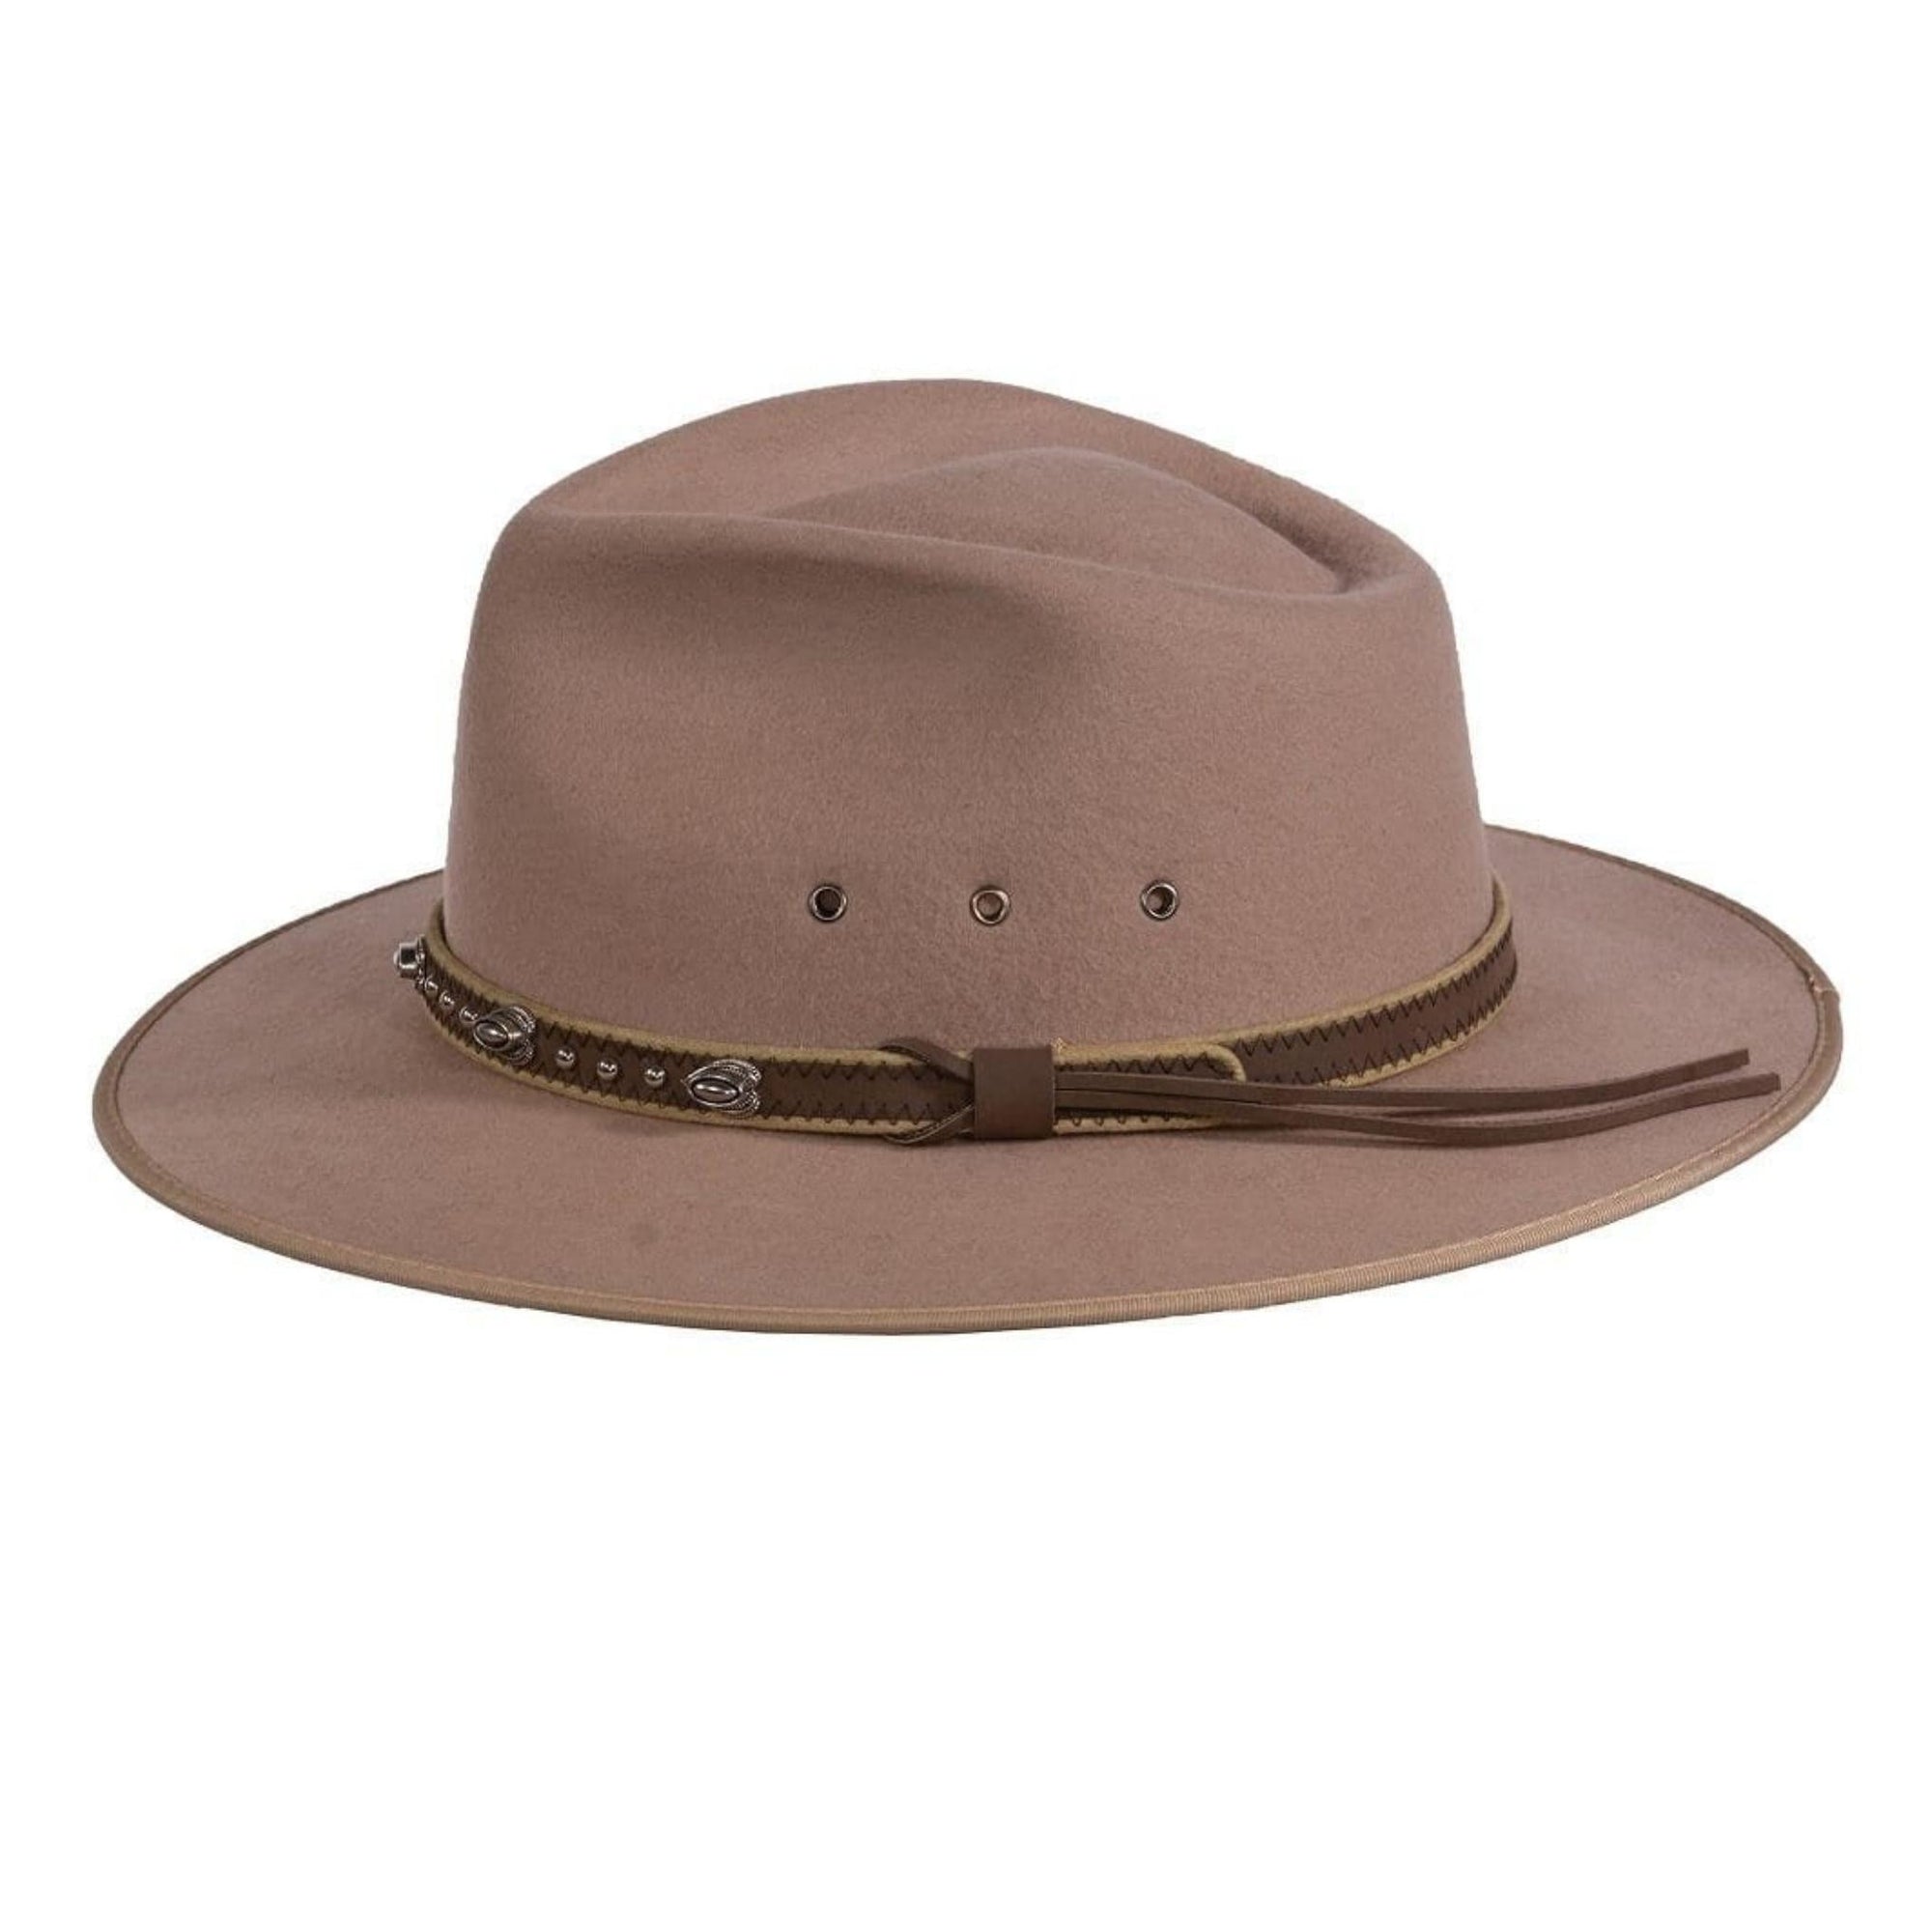 Brown felt hat with brown rope band.